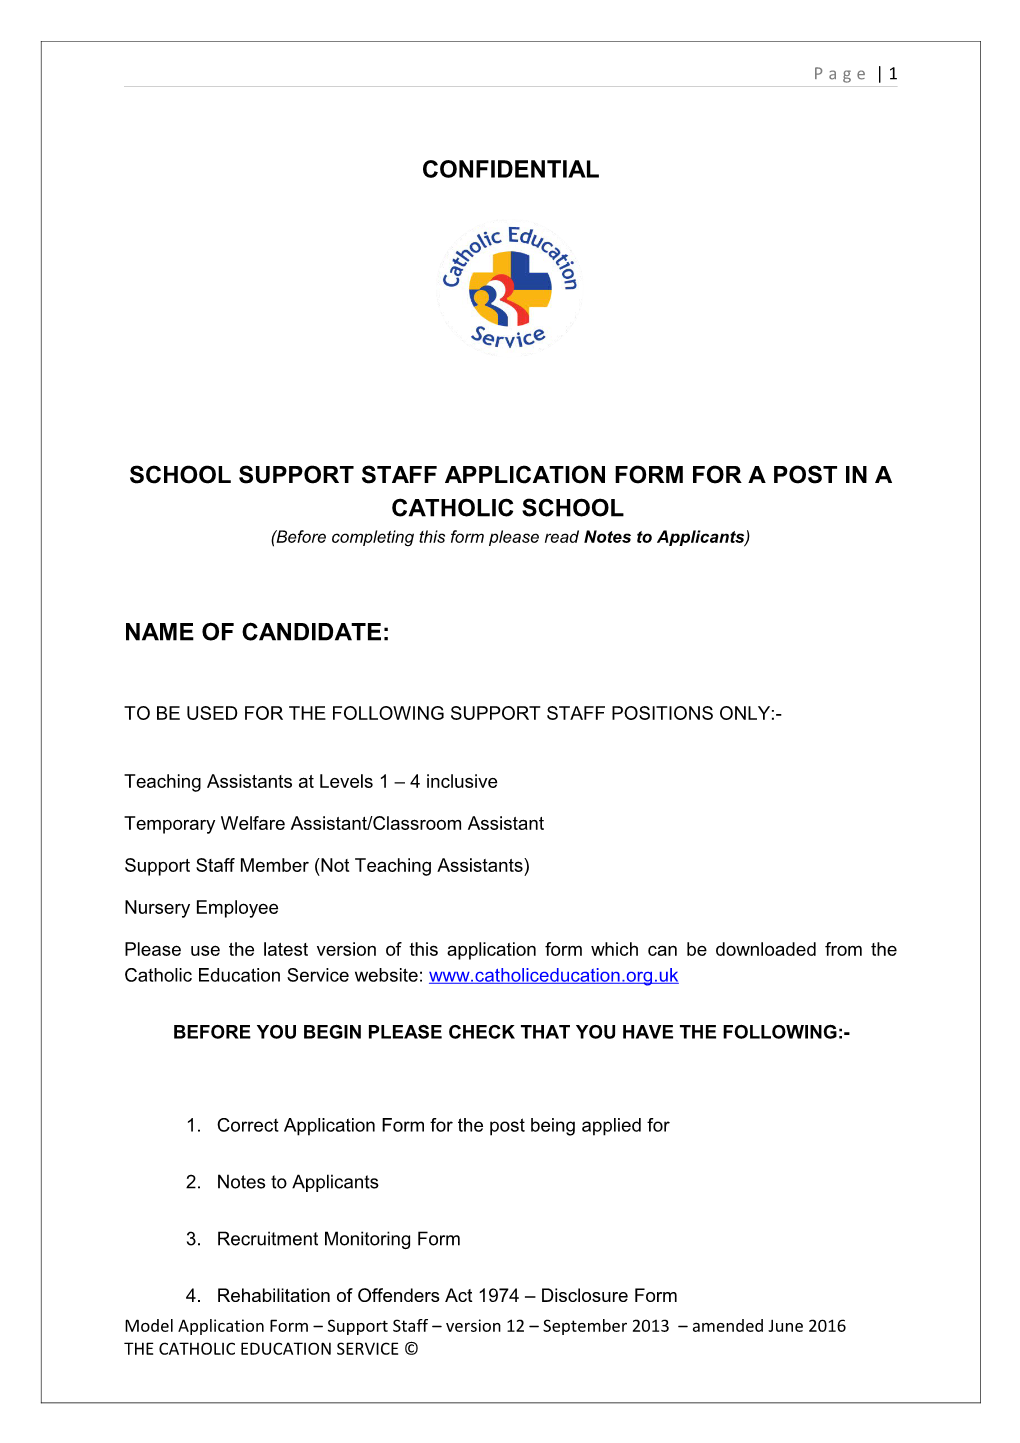 School Support Staff Application Form for a Post in a Catholic School s4